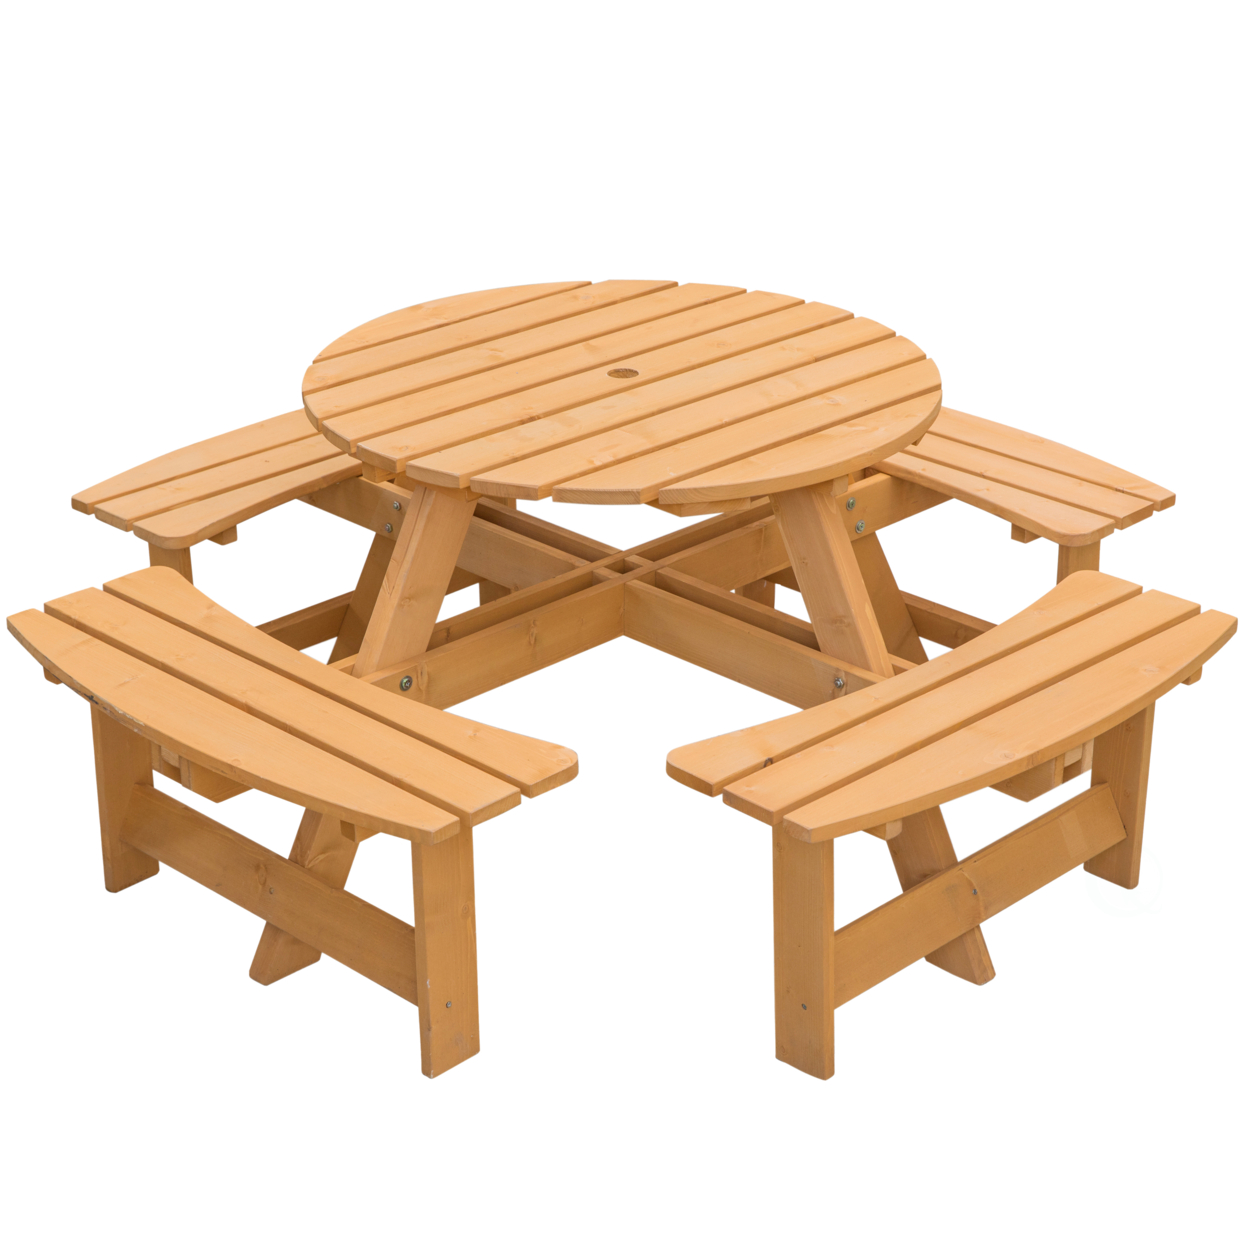 Wooden Outdoor Patio Garden Round Picnic Table With Bench, 8 Person - Natural